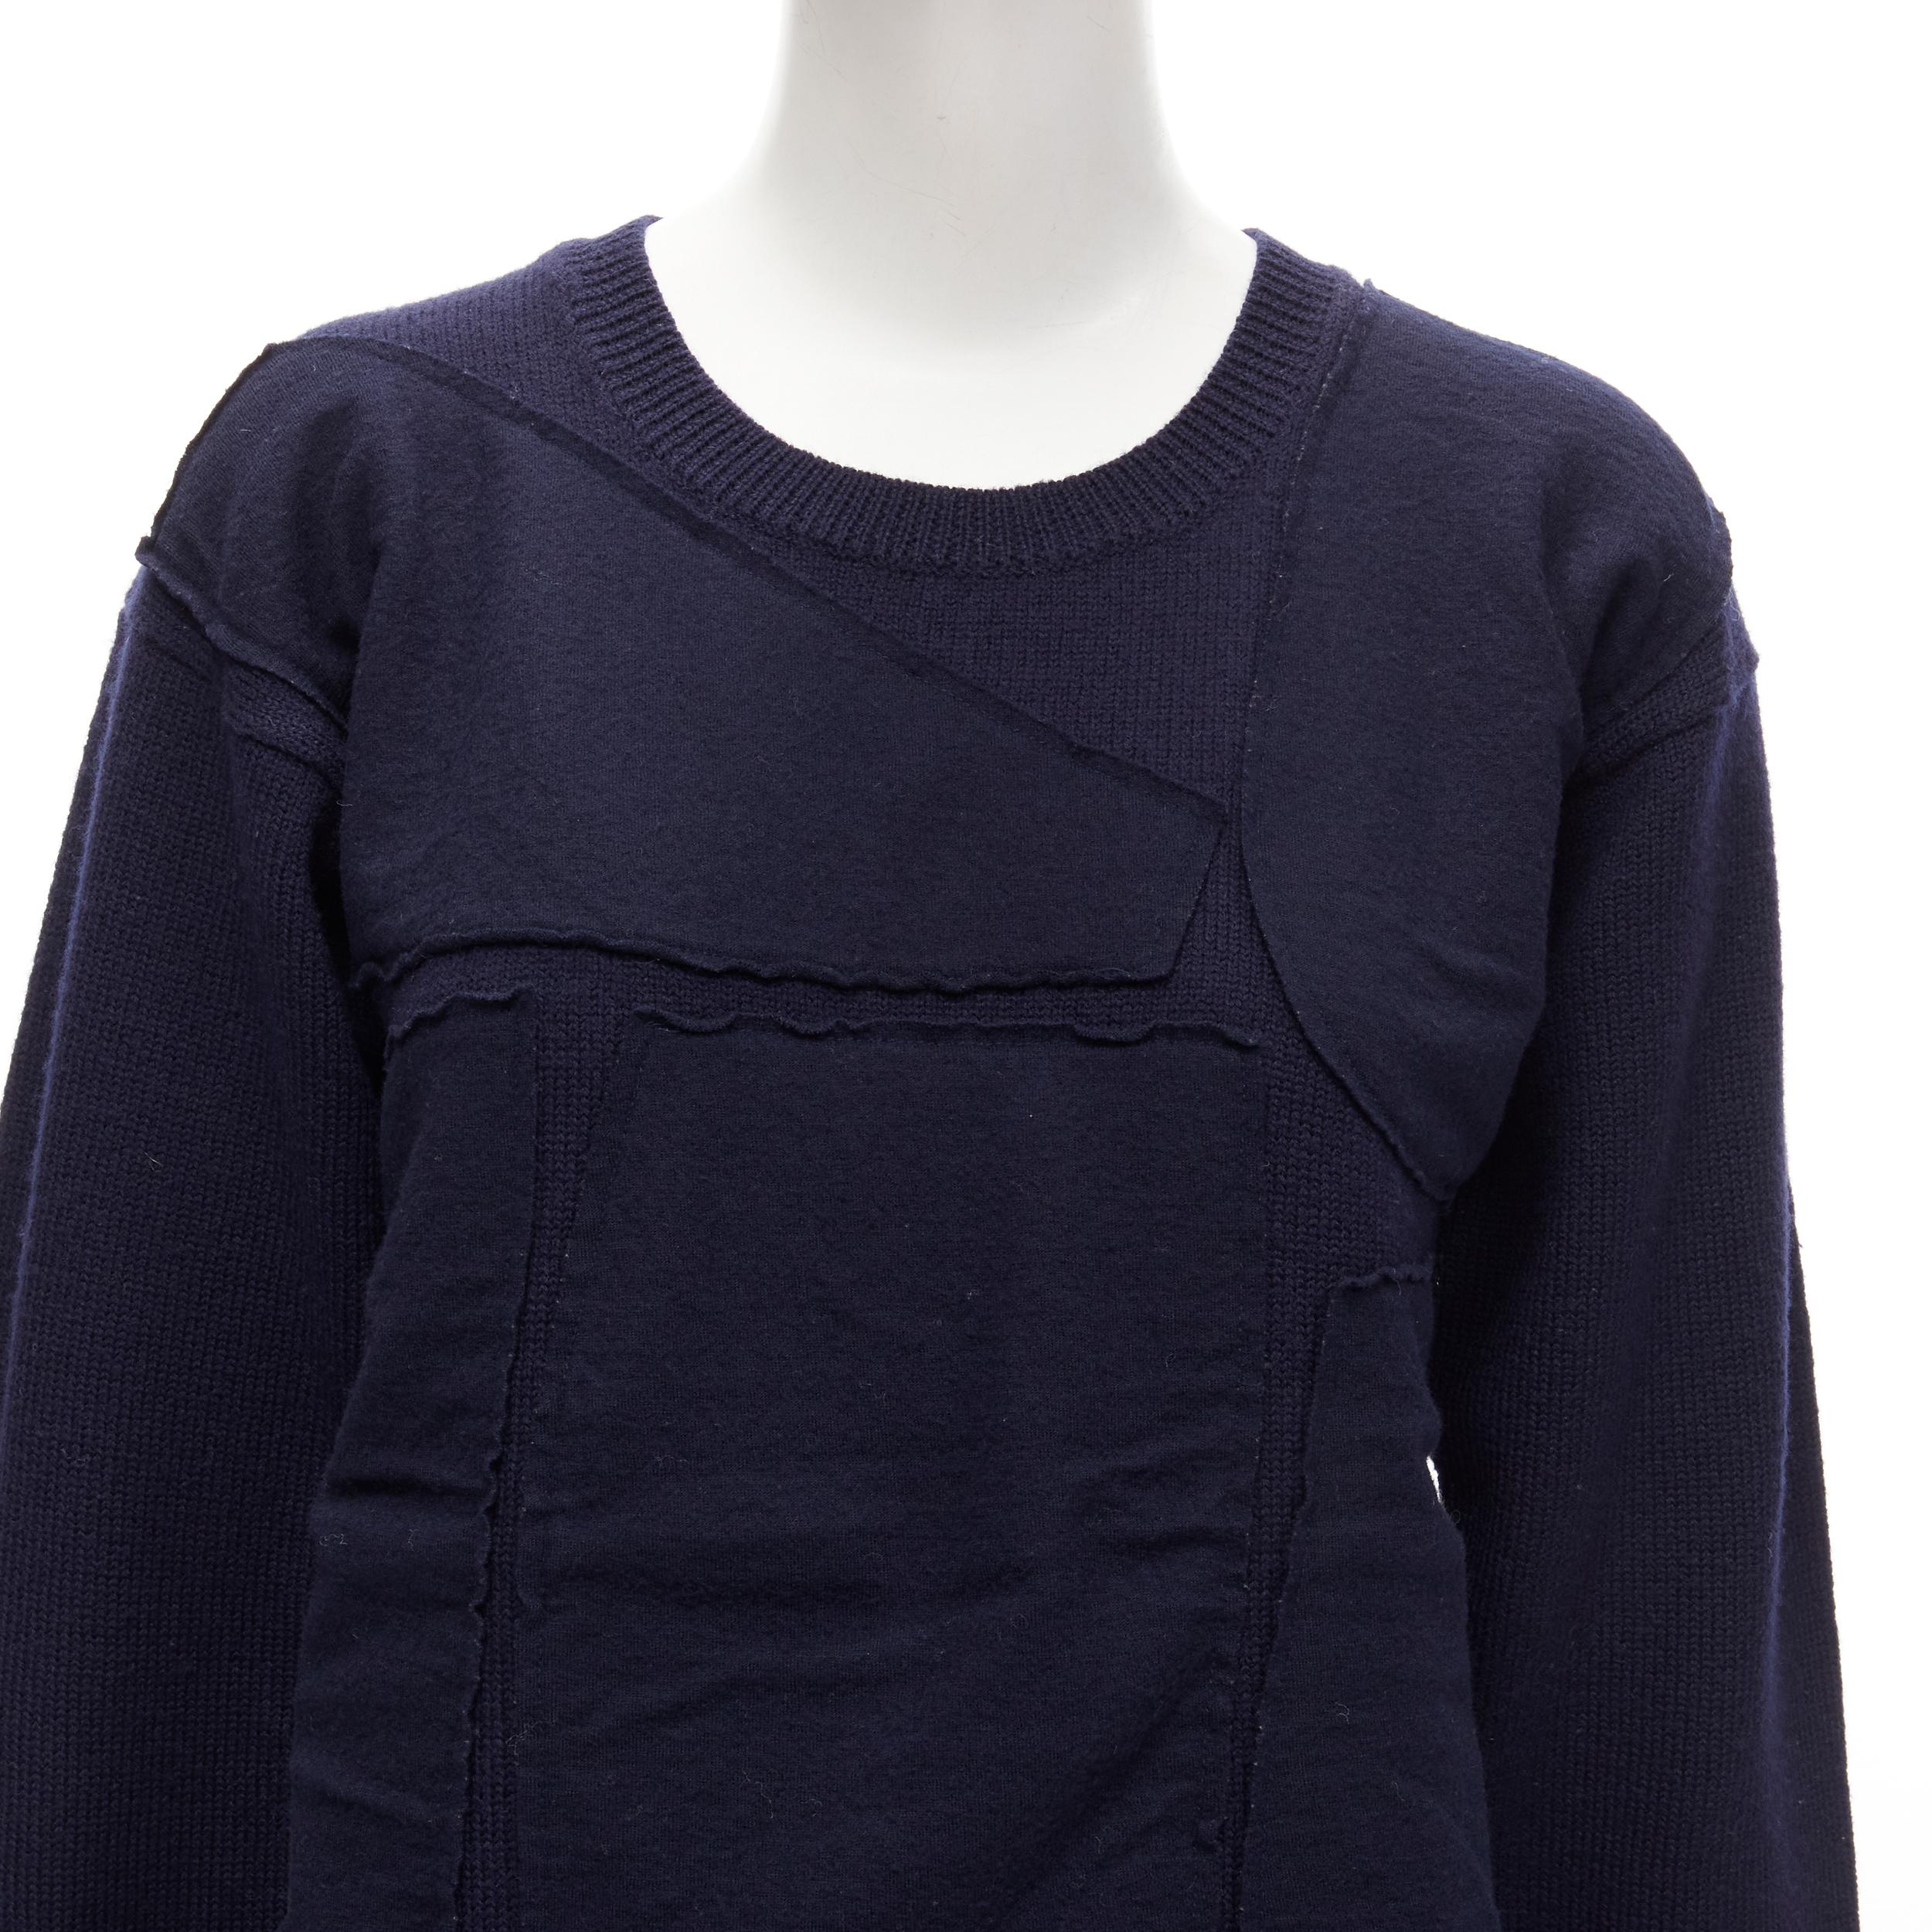 COMME DES GARCONS 1980's Vintage navy wool patchwork sweater top
Reference: TGAS/C01694
Brand: Comme Des Garcons
Designer: Rei Kawakubo
Collection: 1980's
Material: Wool
Color: Blue
Pattern: Solid
Closure: Pullover
Made in: